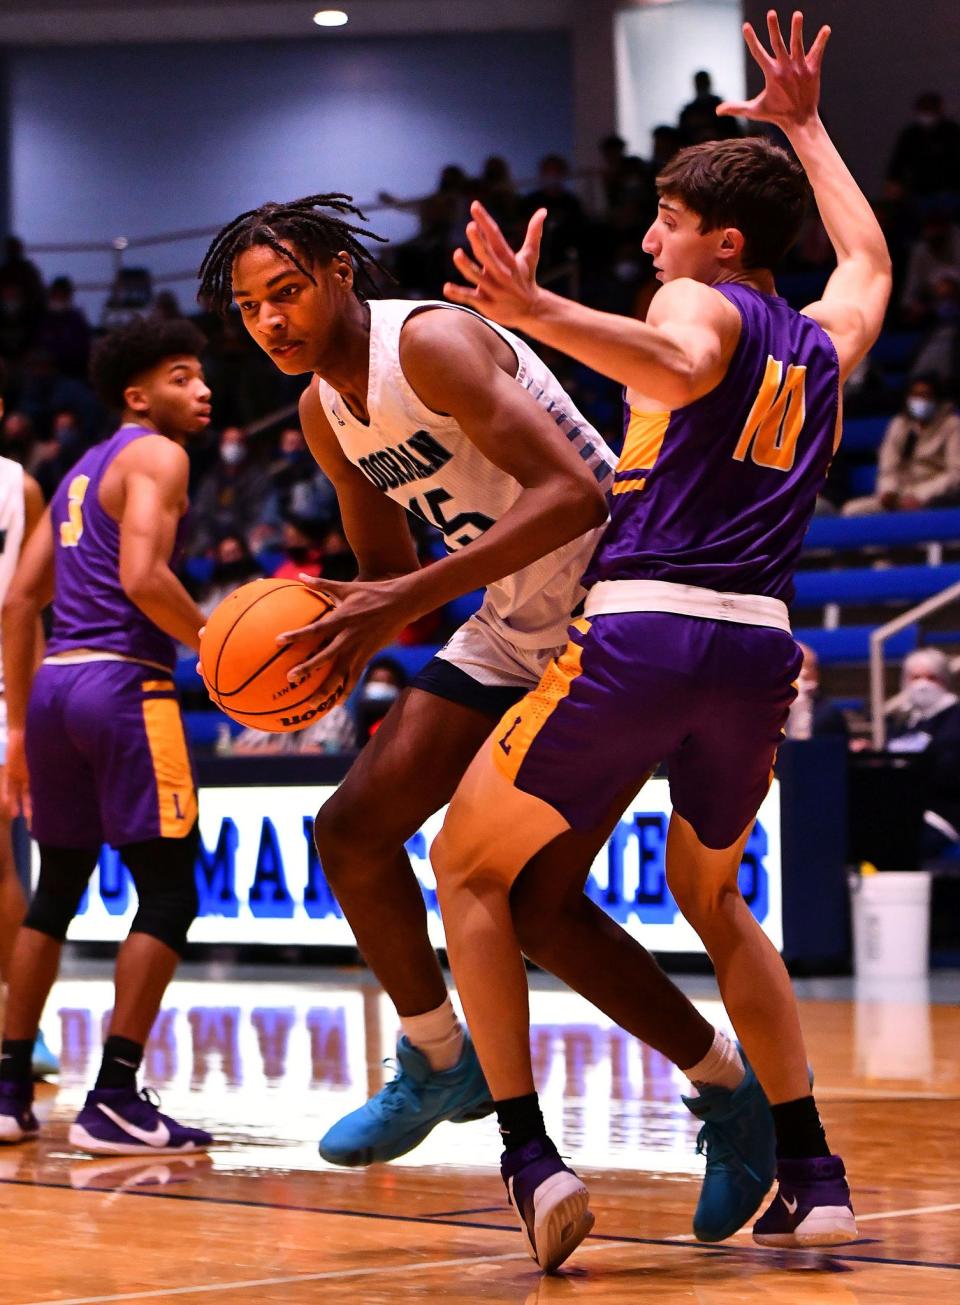 The Dorman Cavaliers take on Legacy Early College during basketball action at Dorman High School in Spartanburg, Wednesday evening, December 2, 2020. Dorman's Noah Clowney (15) drives to the basket against defense from Legacy Early College's Kidd Brizek (10).